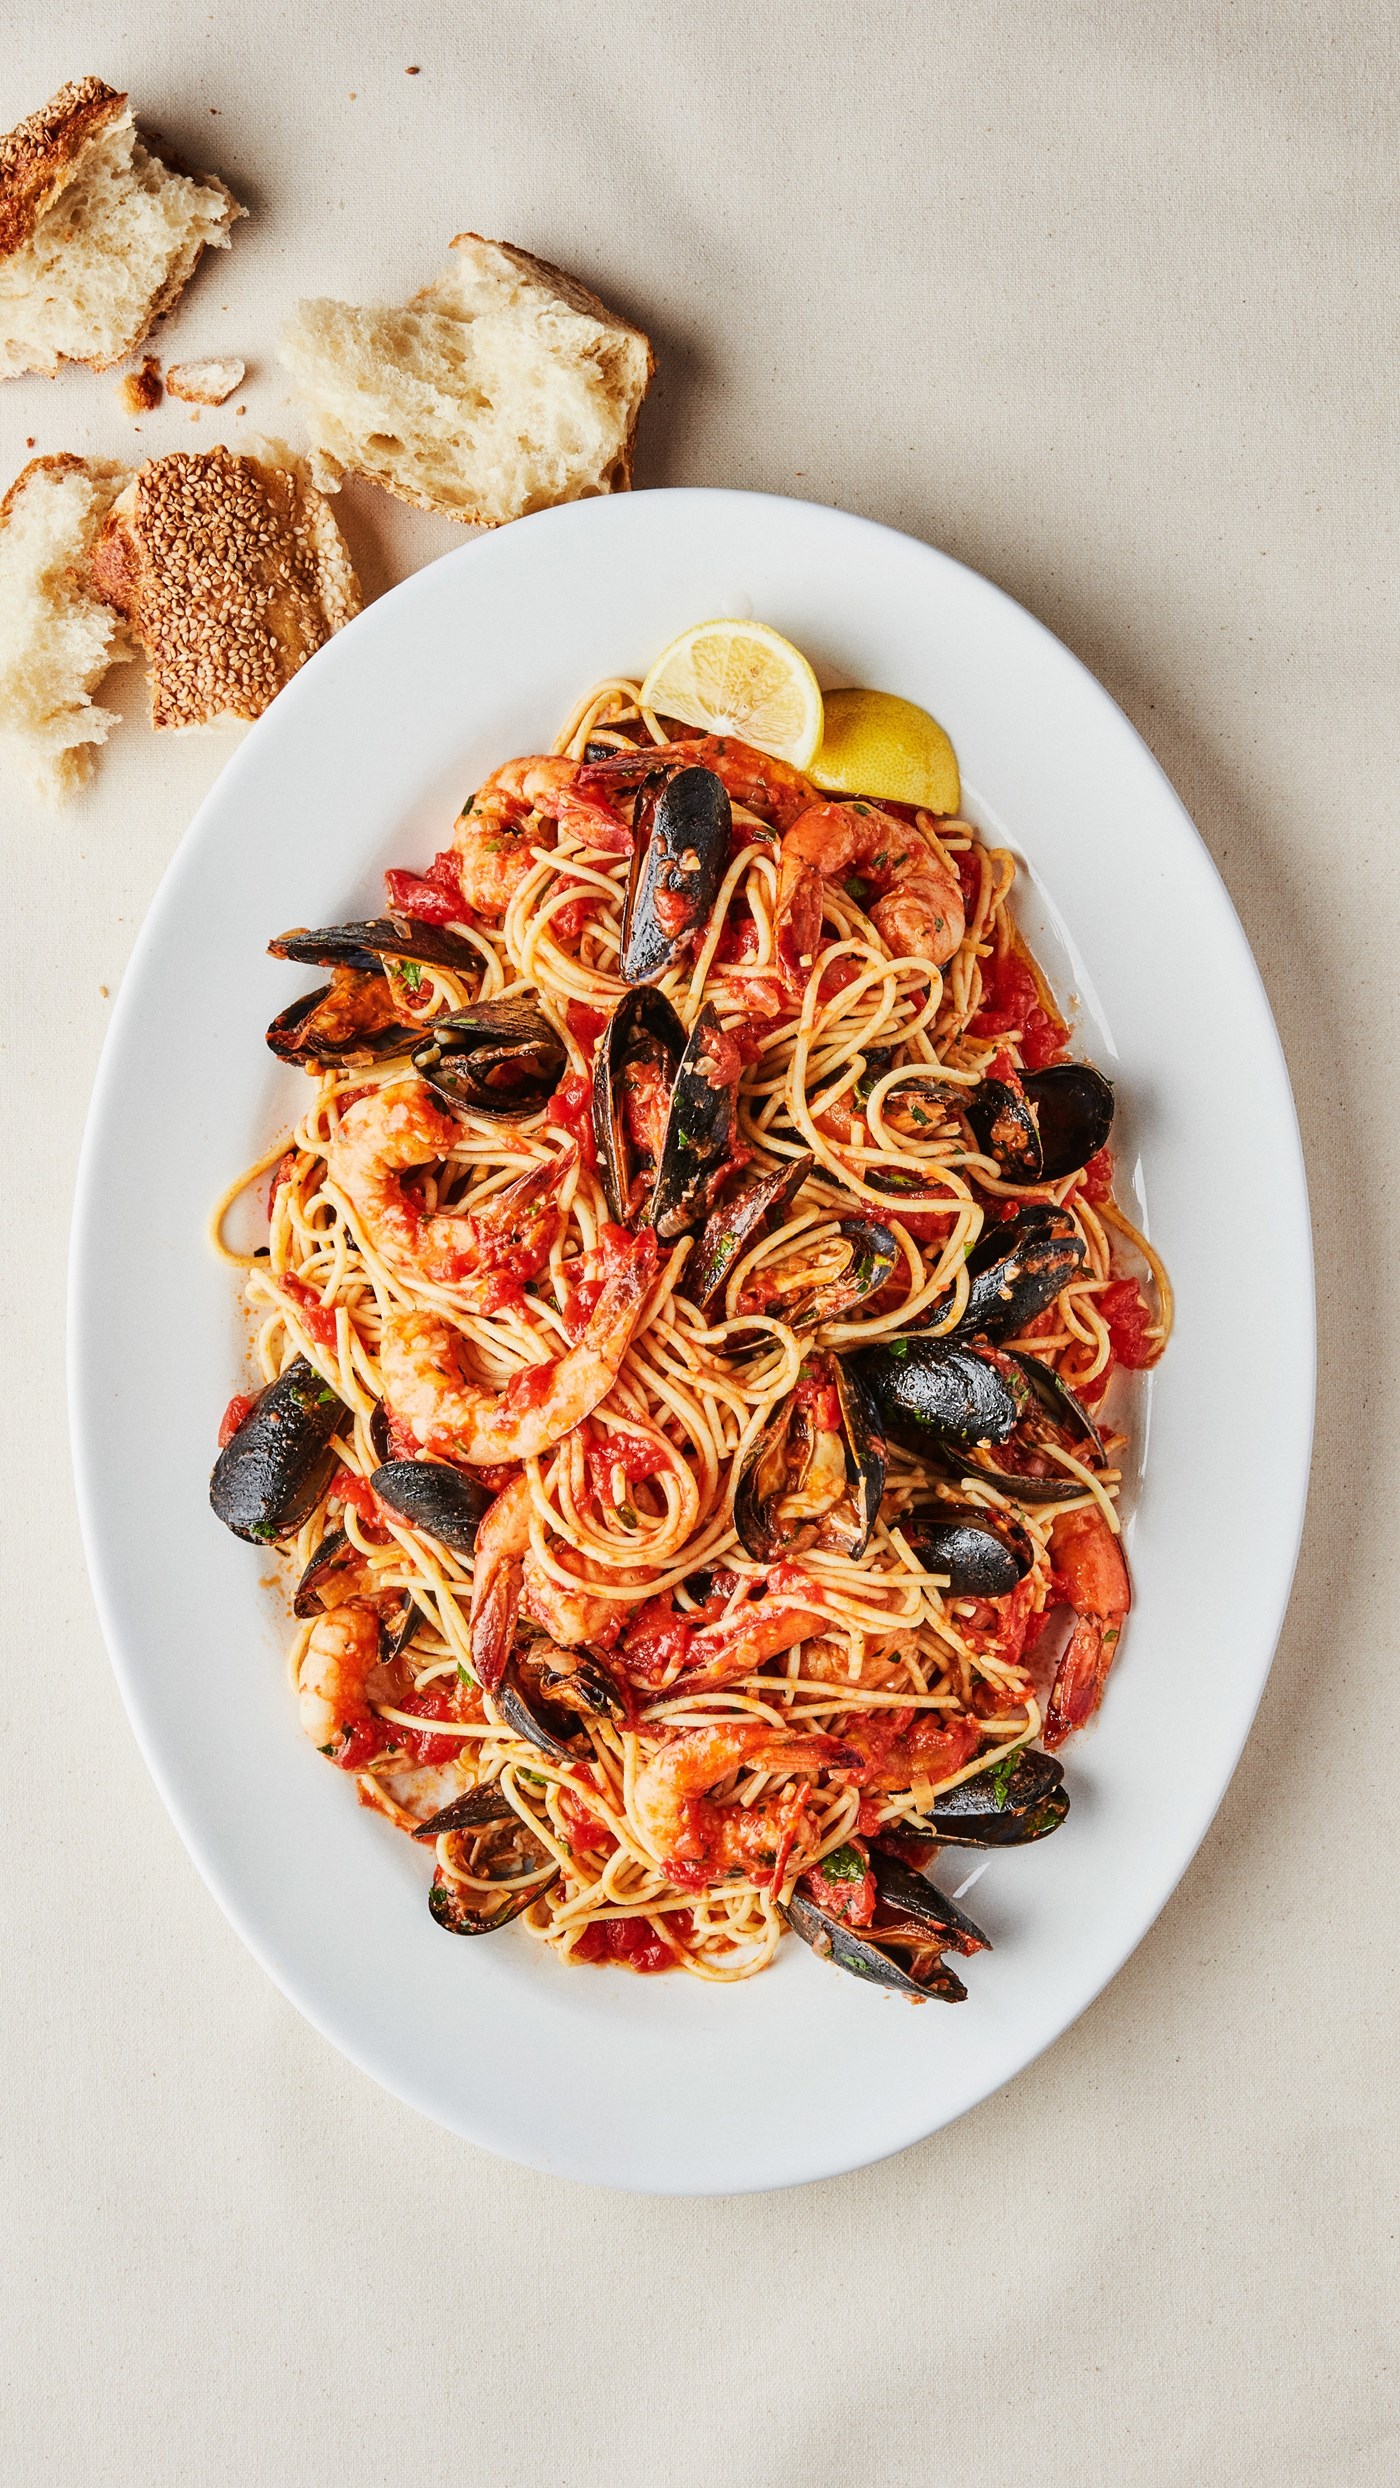 Seafood Spaghetti with Mussels and Shrimp, Bon Appetit